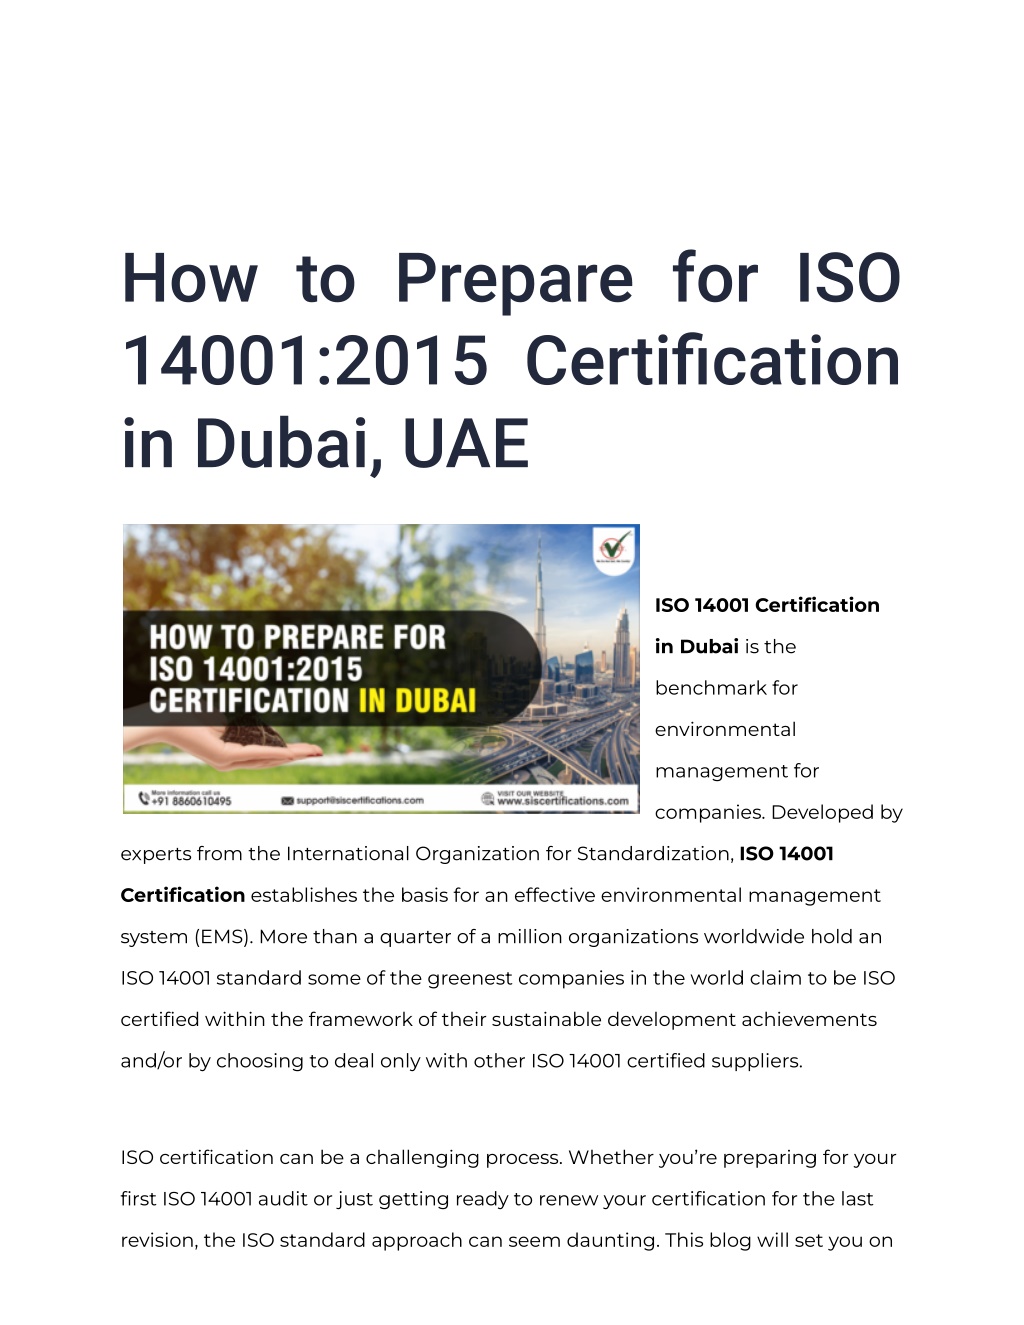 PPT How to Prepare for ISO 14001 2015 Certification in Dubai UAE